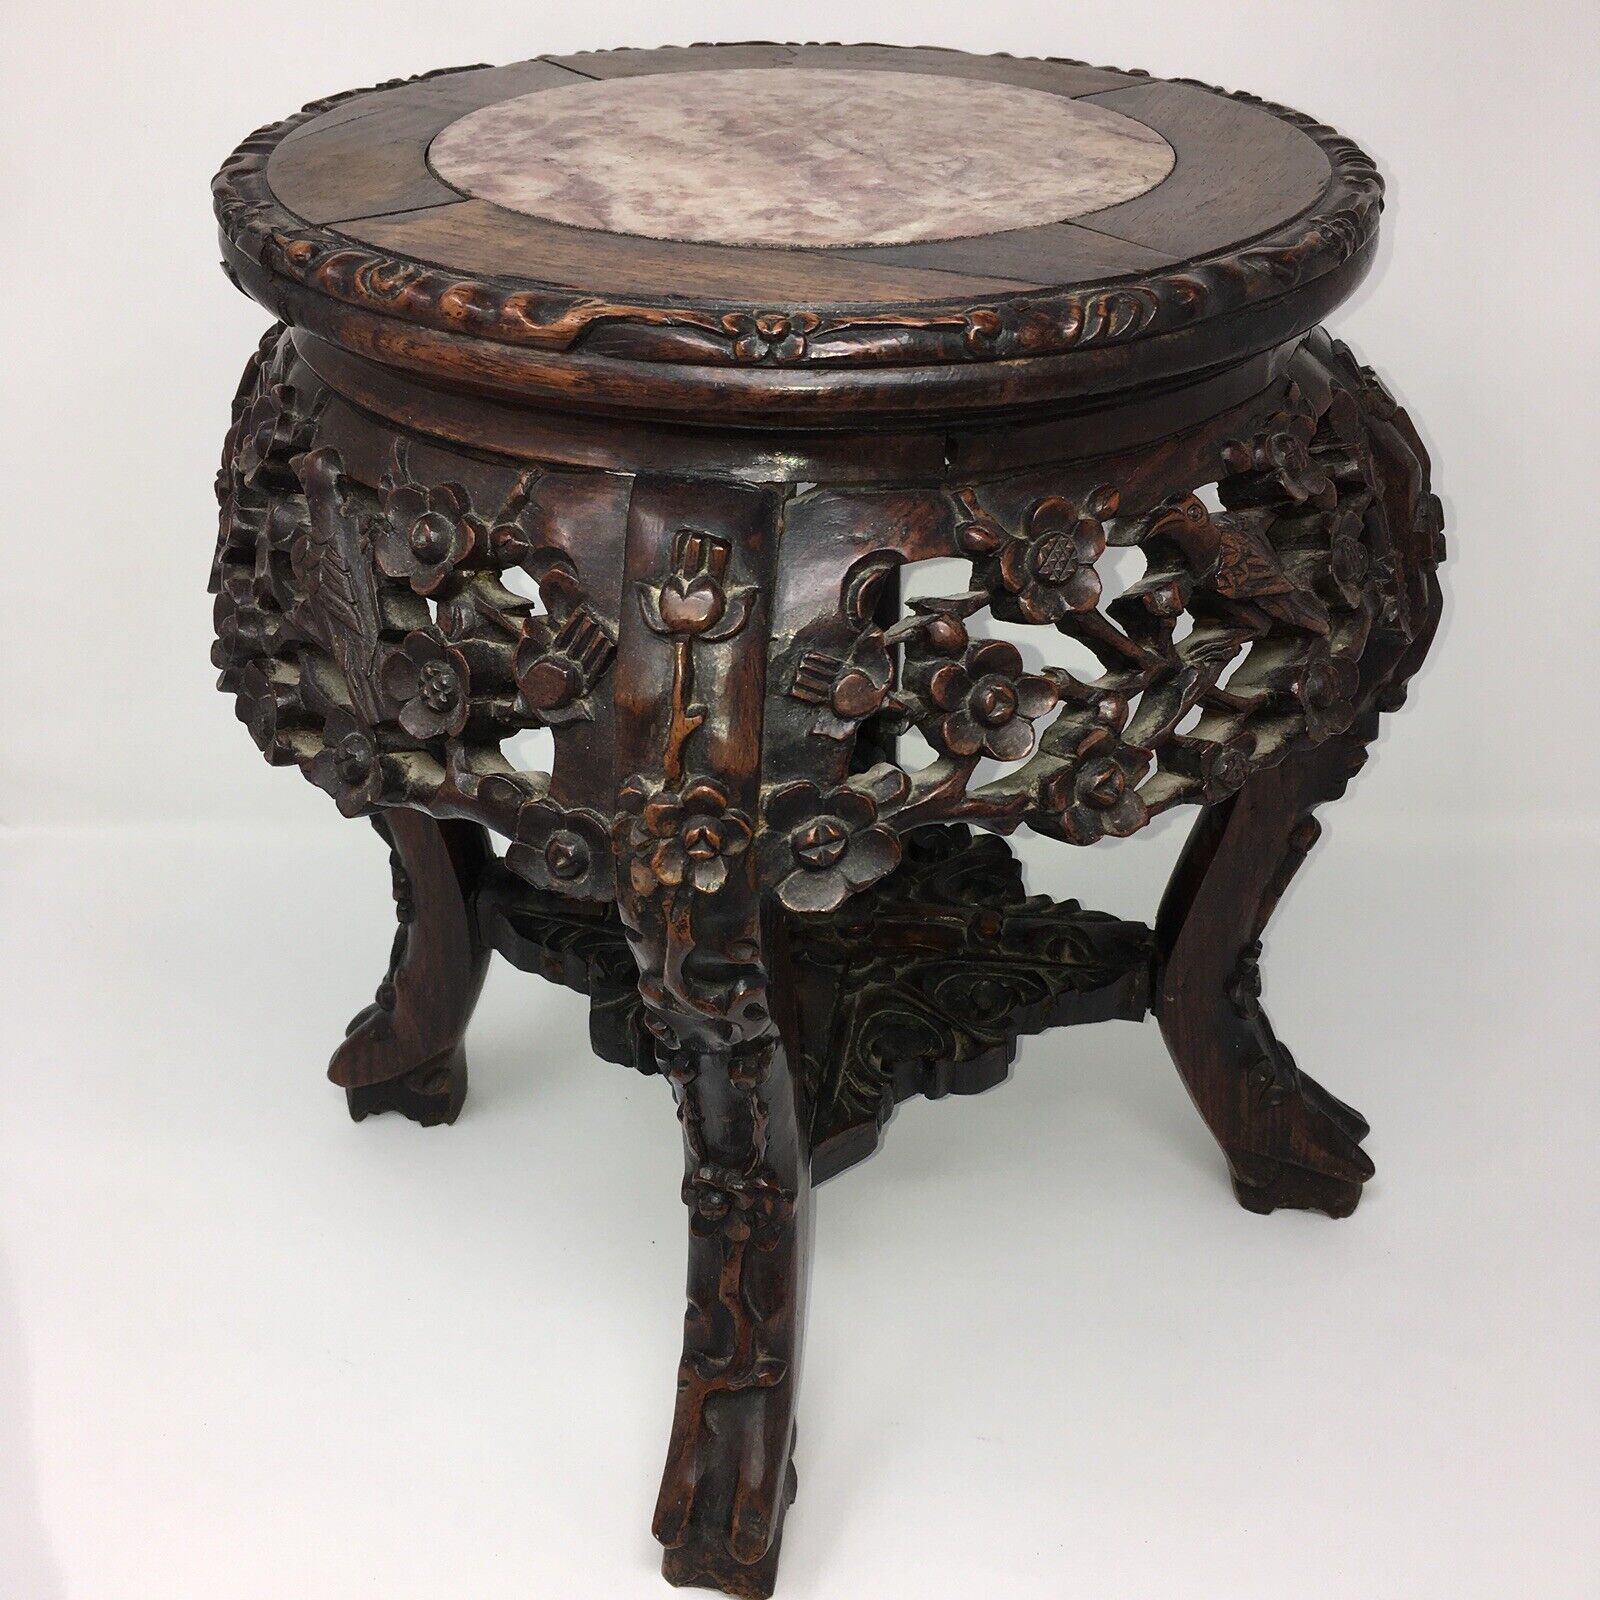 C1860 Carved Rosewood Plant Stand Marble Top Antique Wood Table Birds Flowers